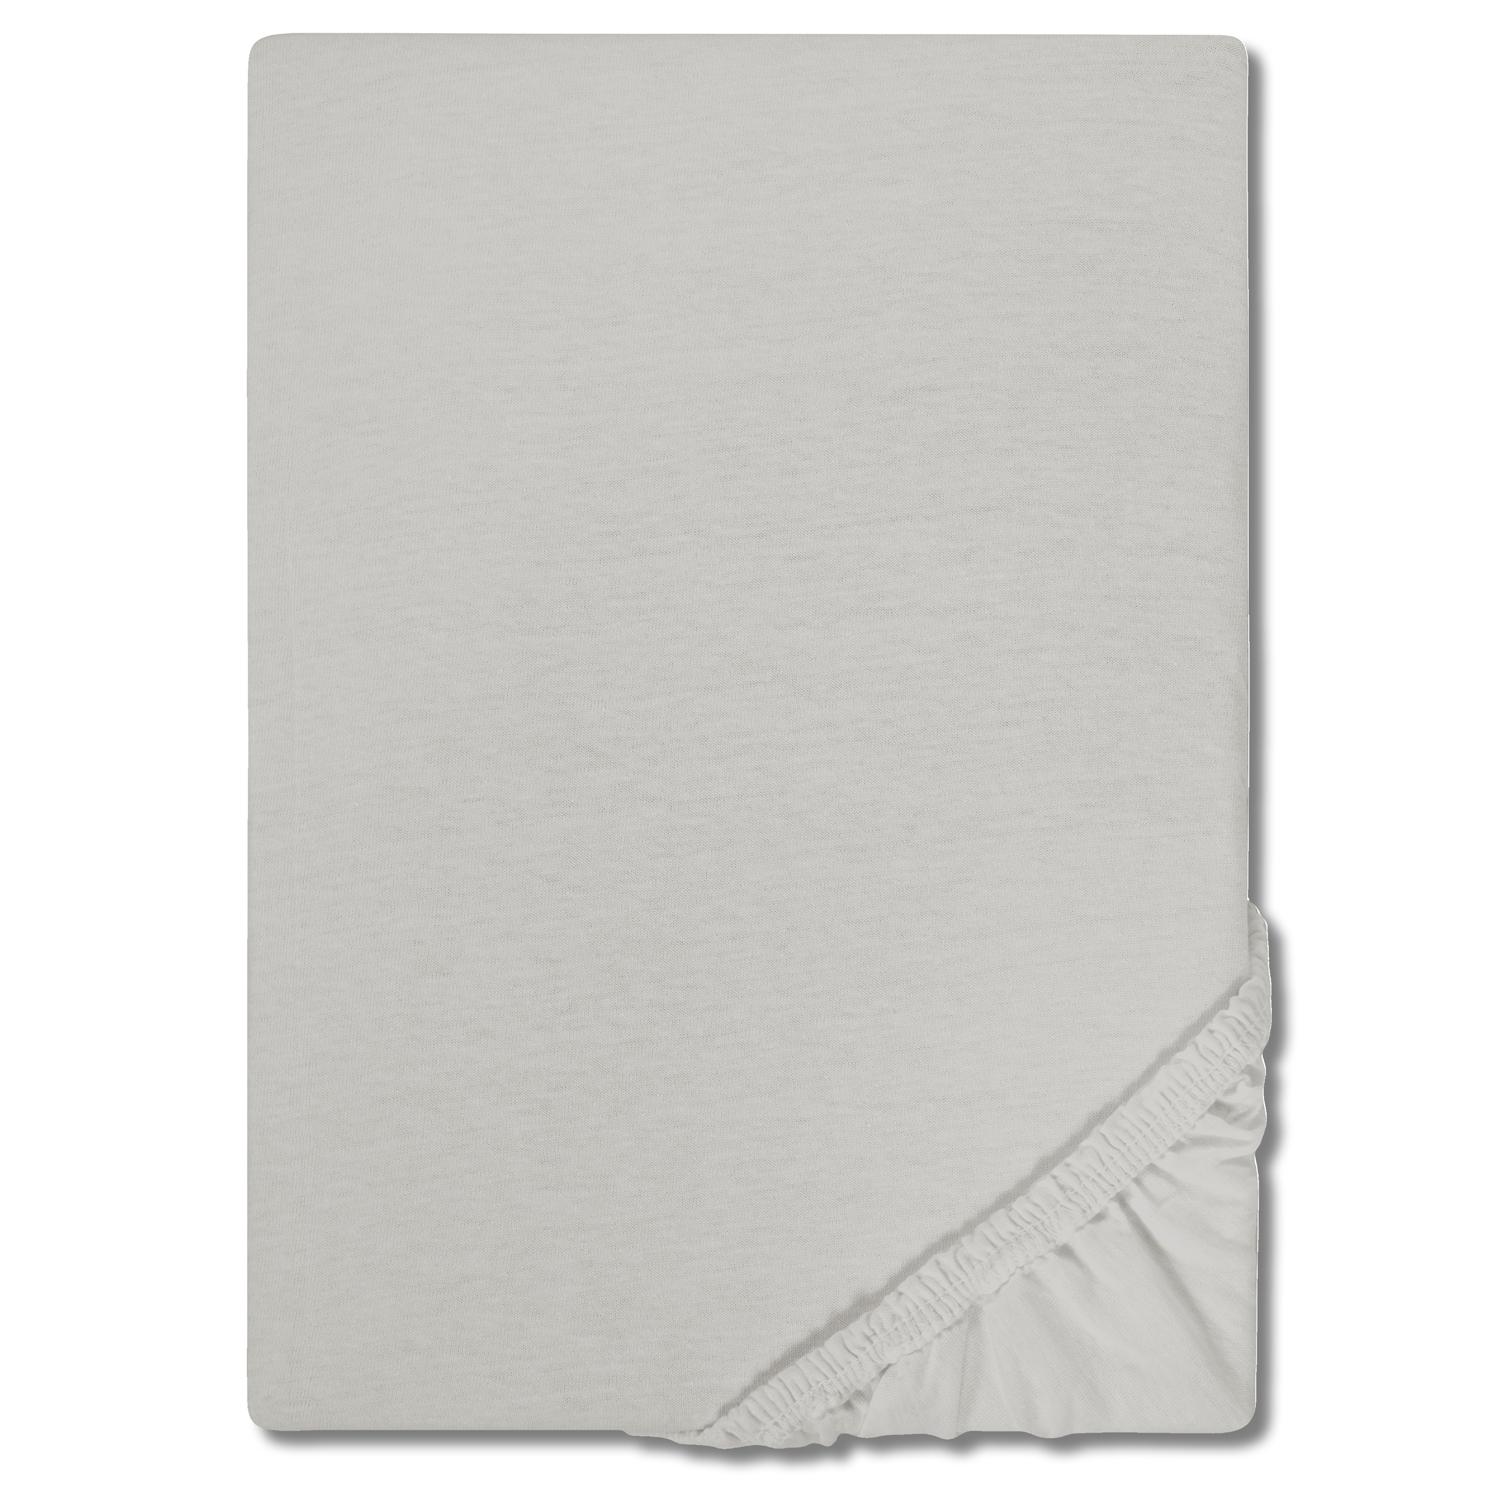 CloudComfort Basic fitted sheet jersey stretch silver gray 120 x 200 cm